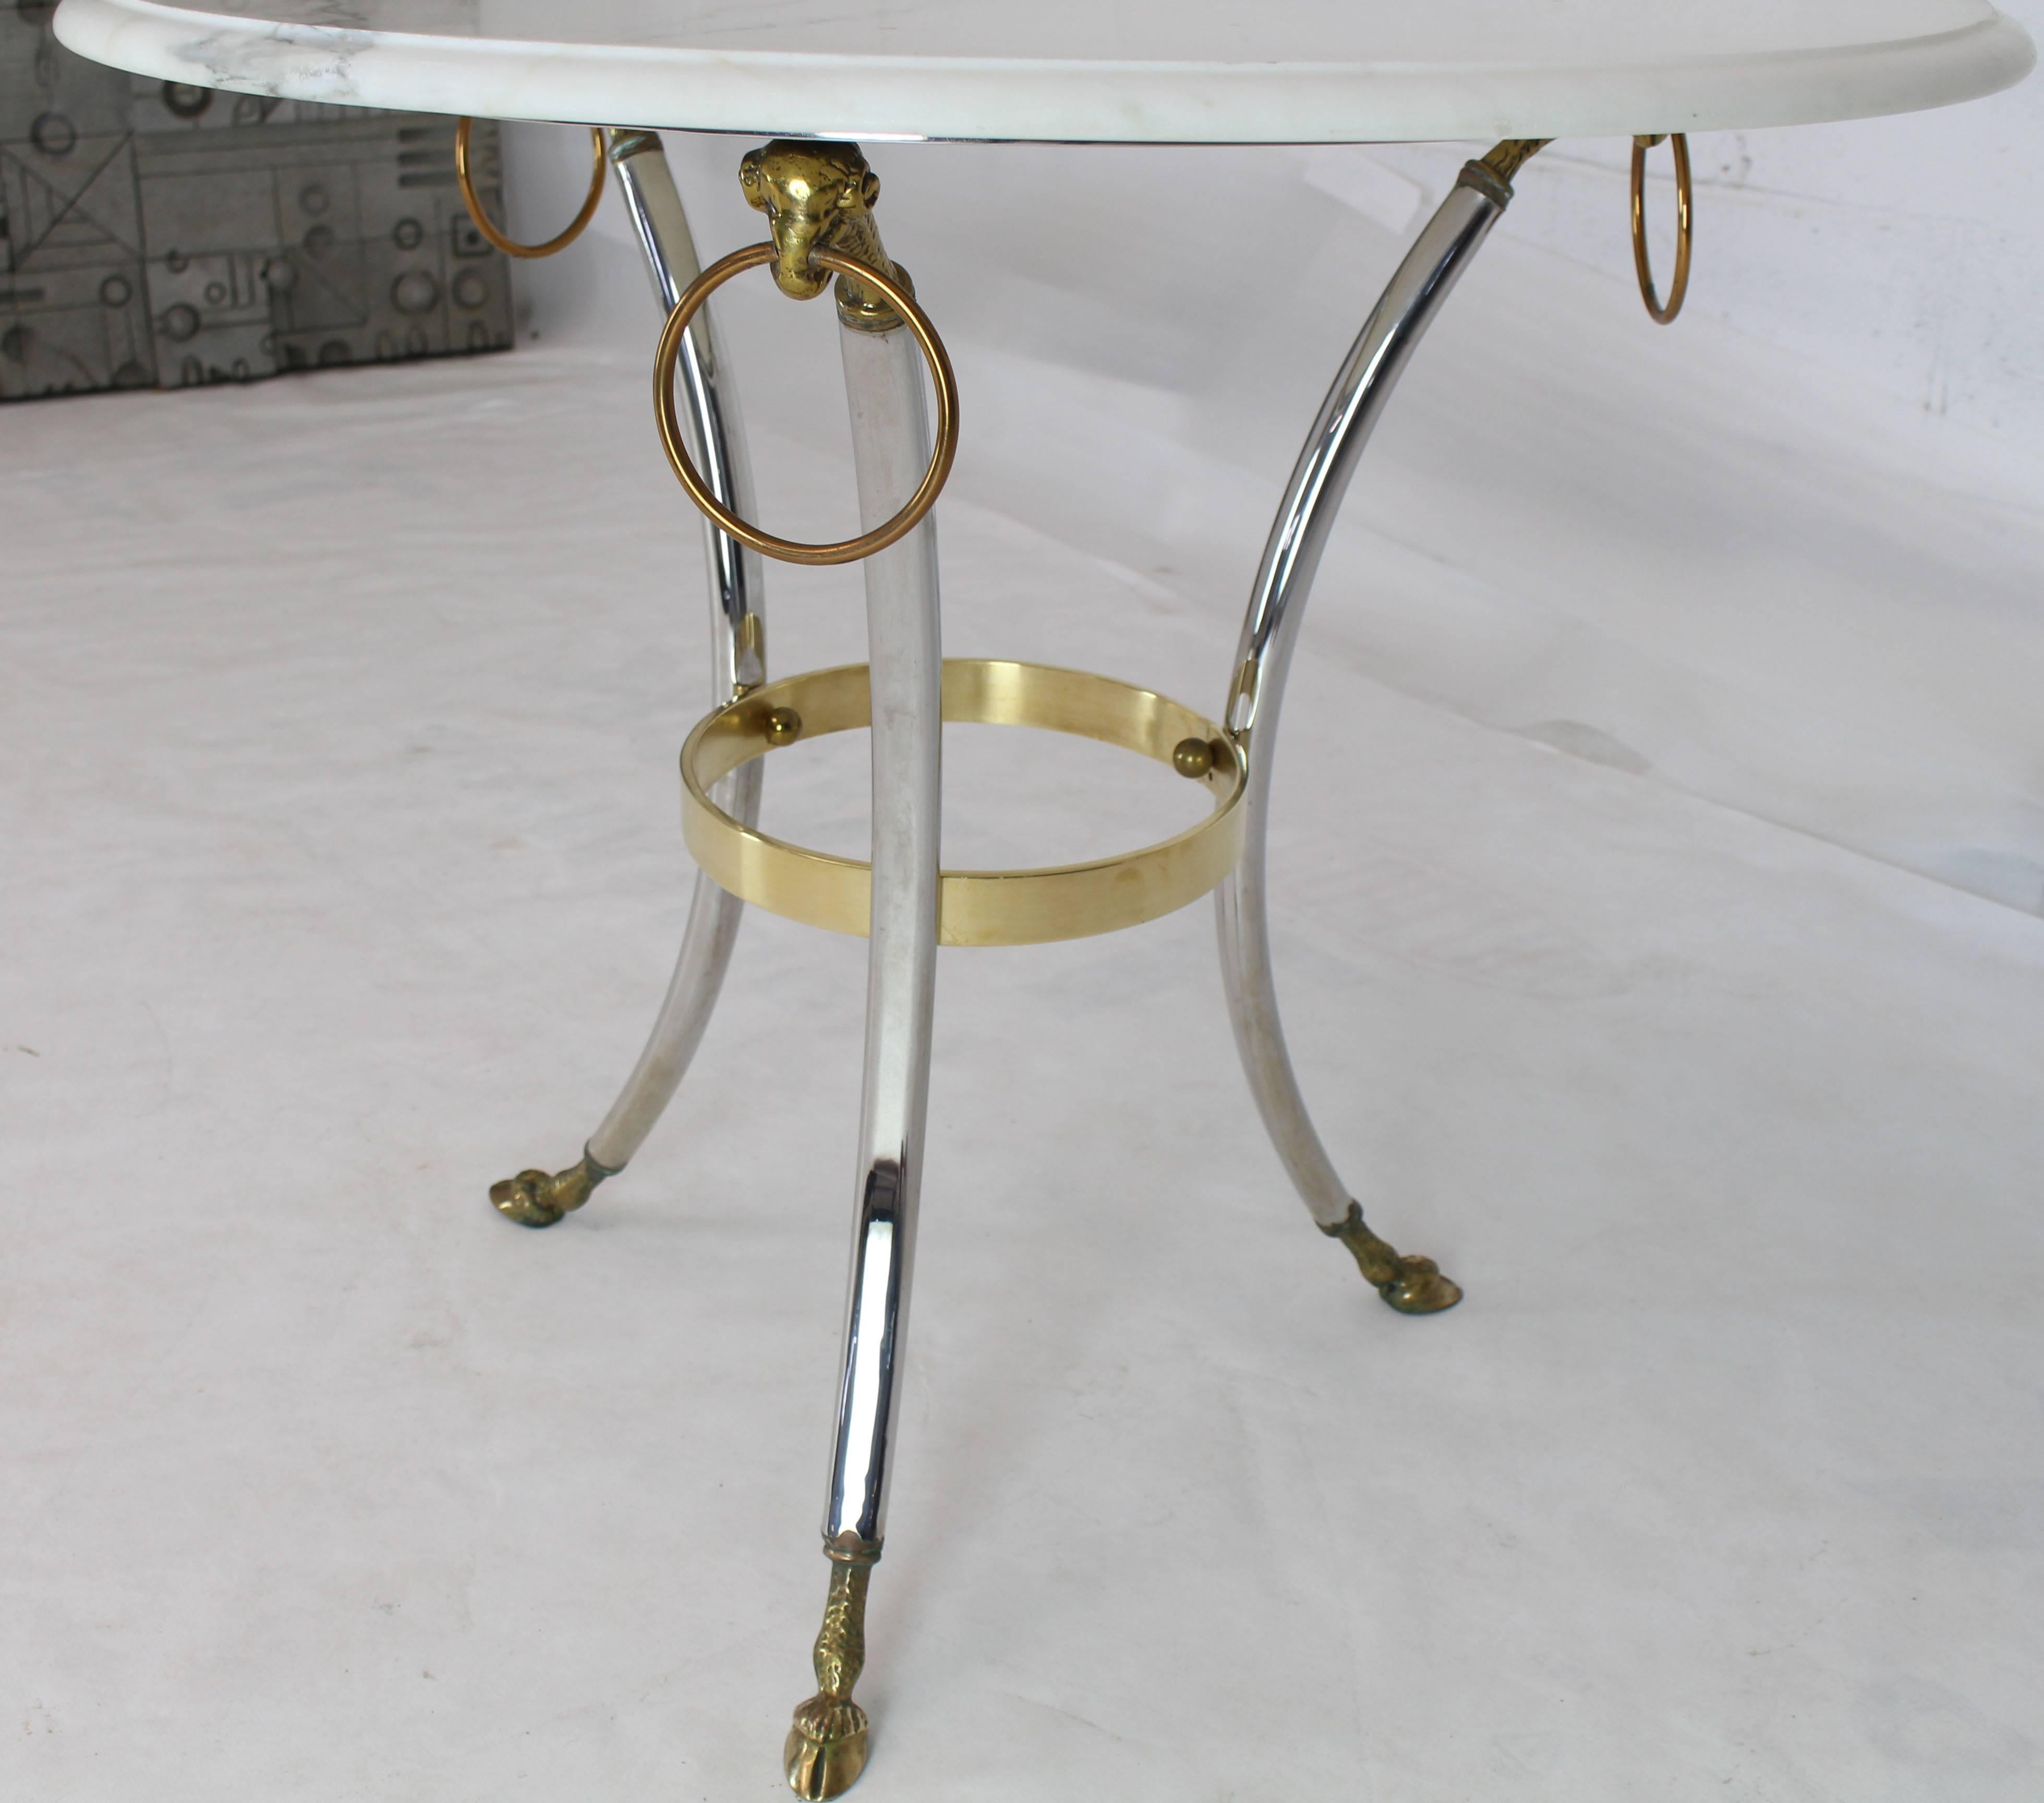 Brass Chrome Marble-Top Hoof Feet Large Rings Accents Gueridon Centre Table In Excellent Condition For Sale In Rockaway, NJ